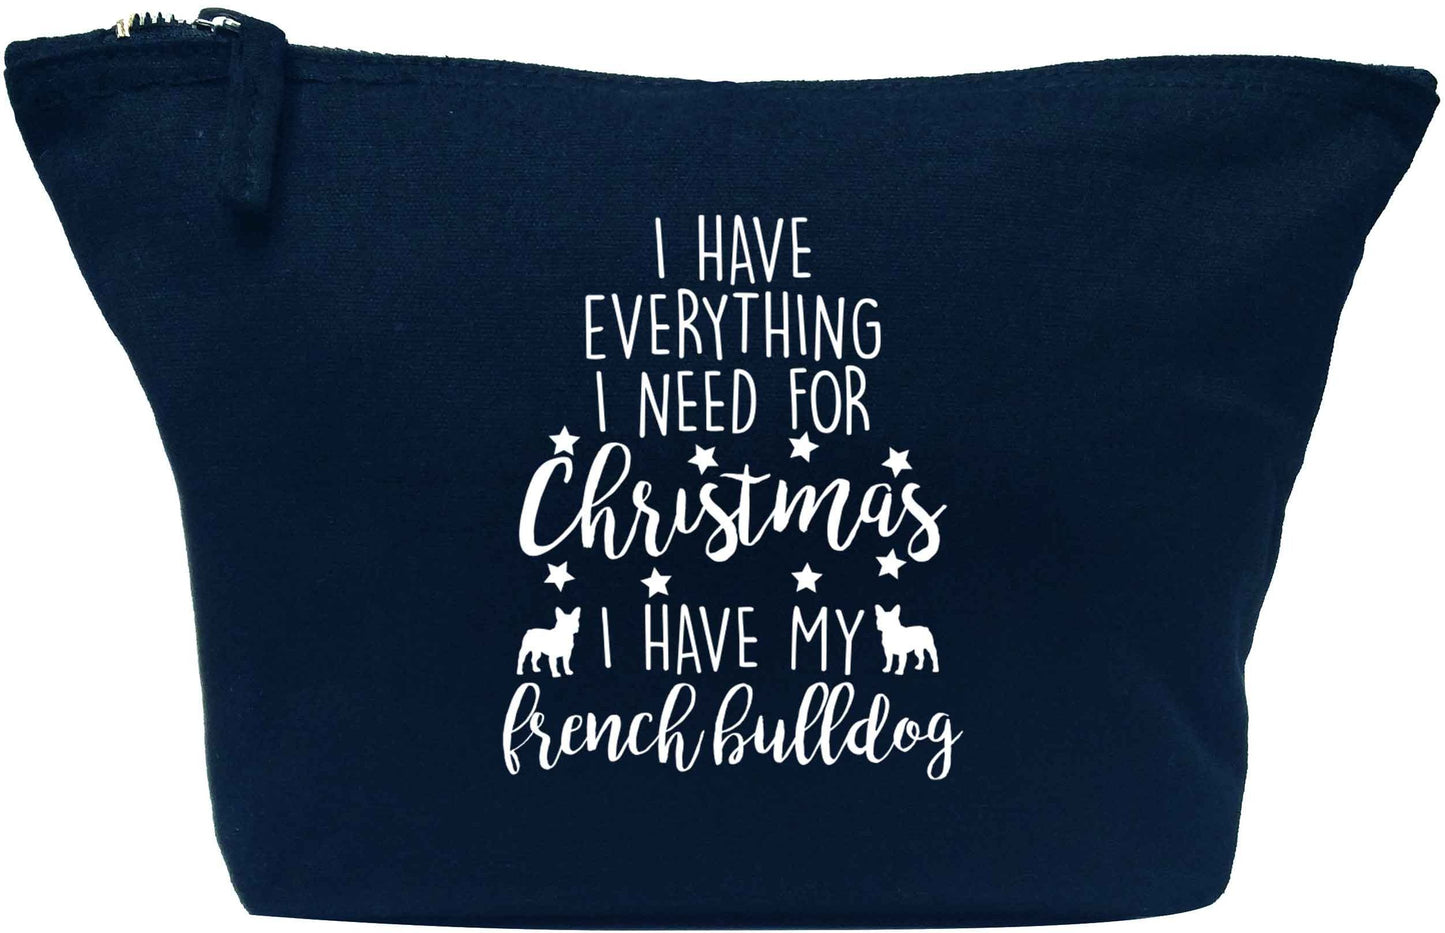 I have everything I need for Christmas I have my french bulldog navy makeup bag